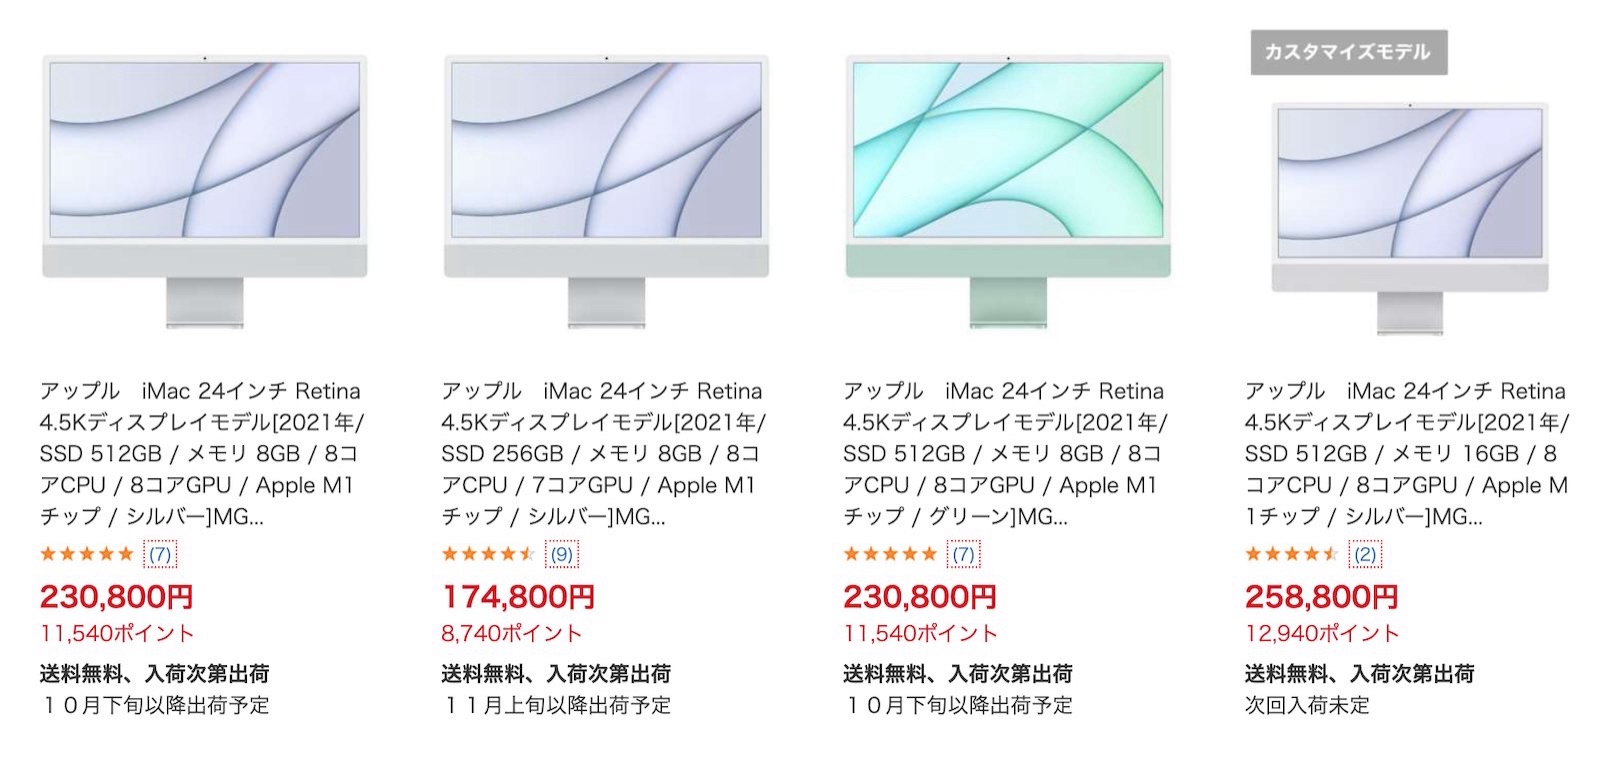 Imac out of stock inj biccamera